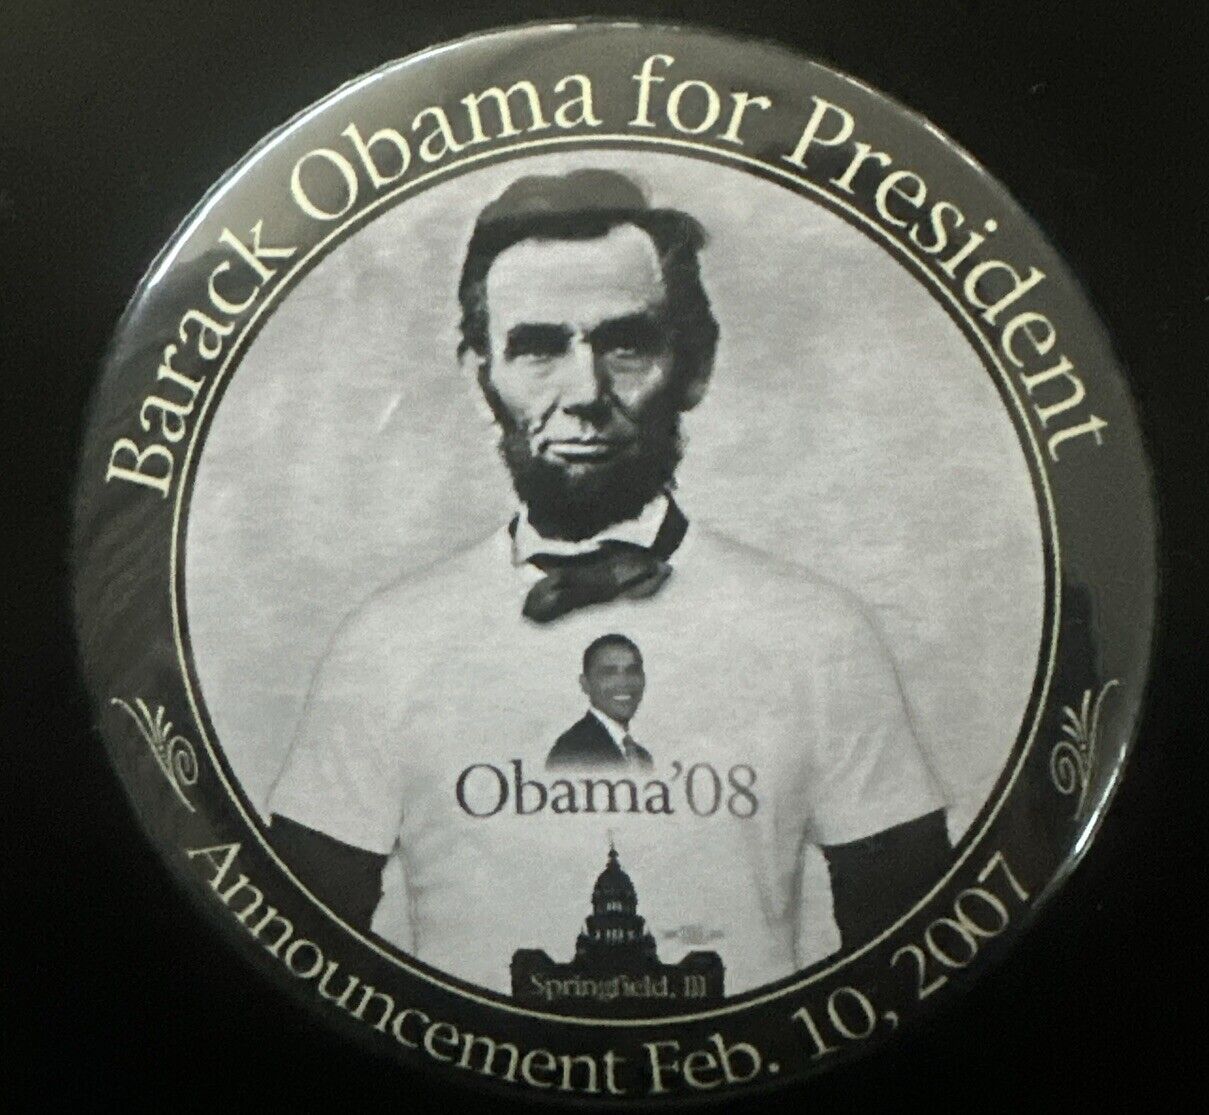 2/10/2007 Barack Obama for President Announcement Pin Abe Lincoln in a T-shirt